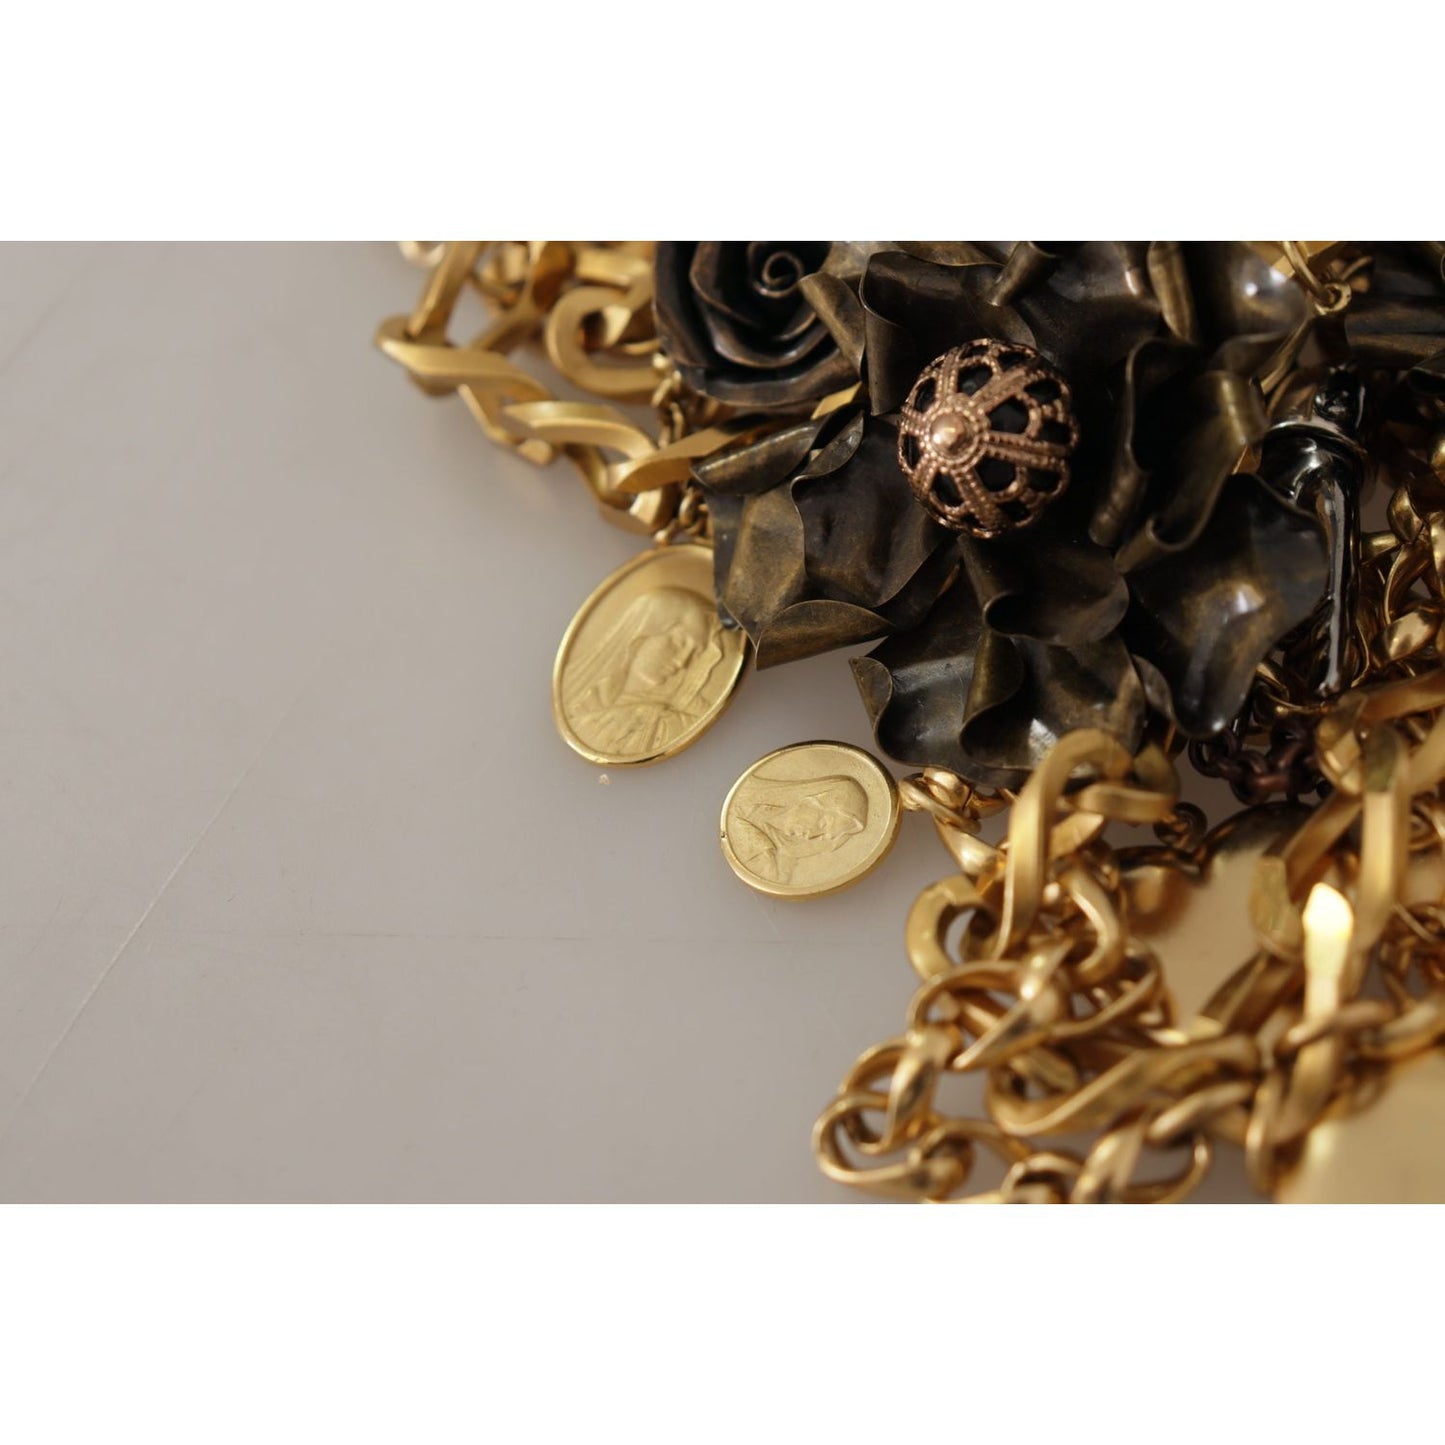 Dolce & Gabbana Sicilian Glamour Gold Statement Necklace gold-brass-sicily-charm-heart-statement-necklace WOMAN NECKLACE IMG_3835-scaled-aa386bc9-ceb.jpg